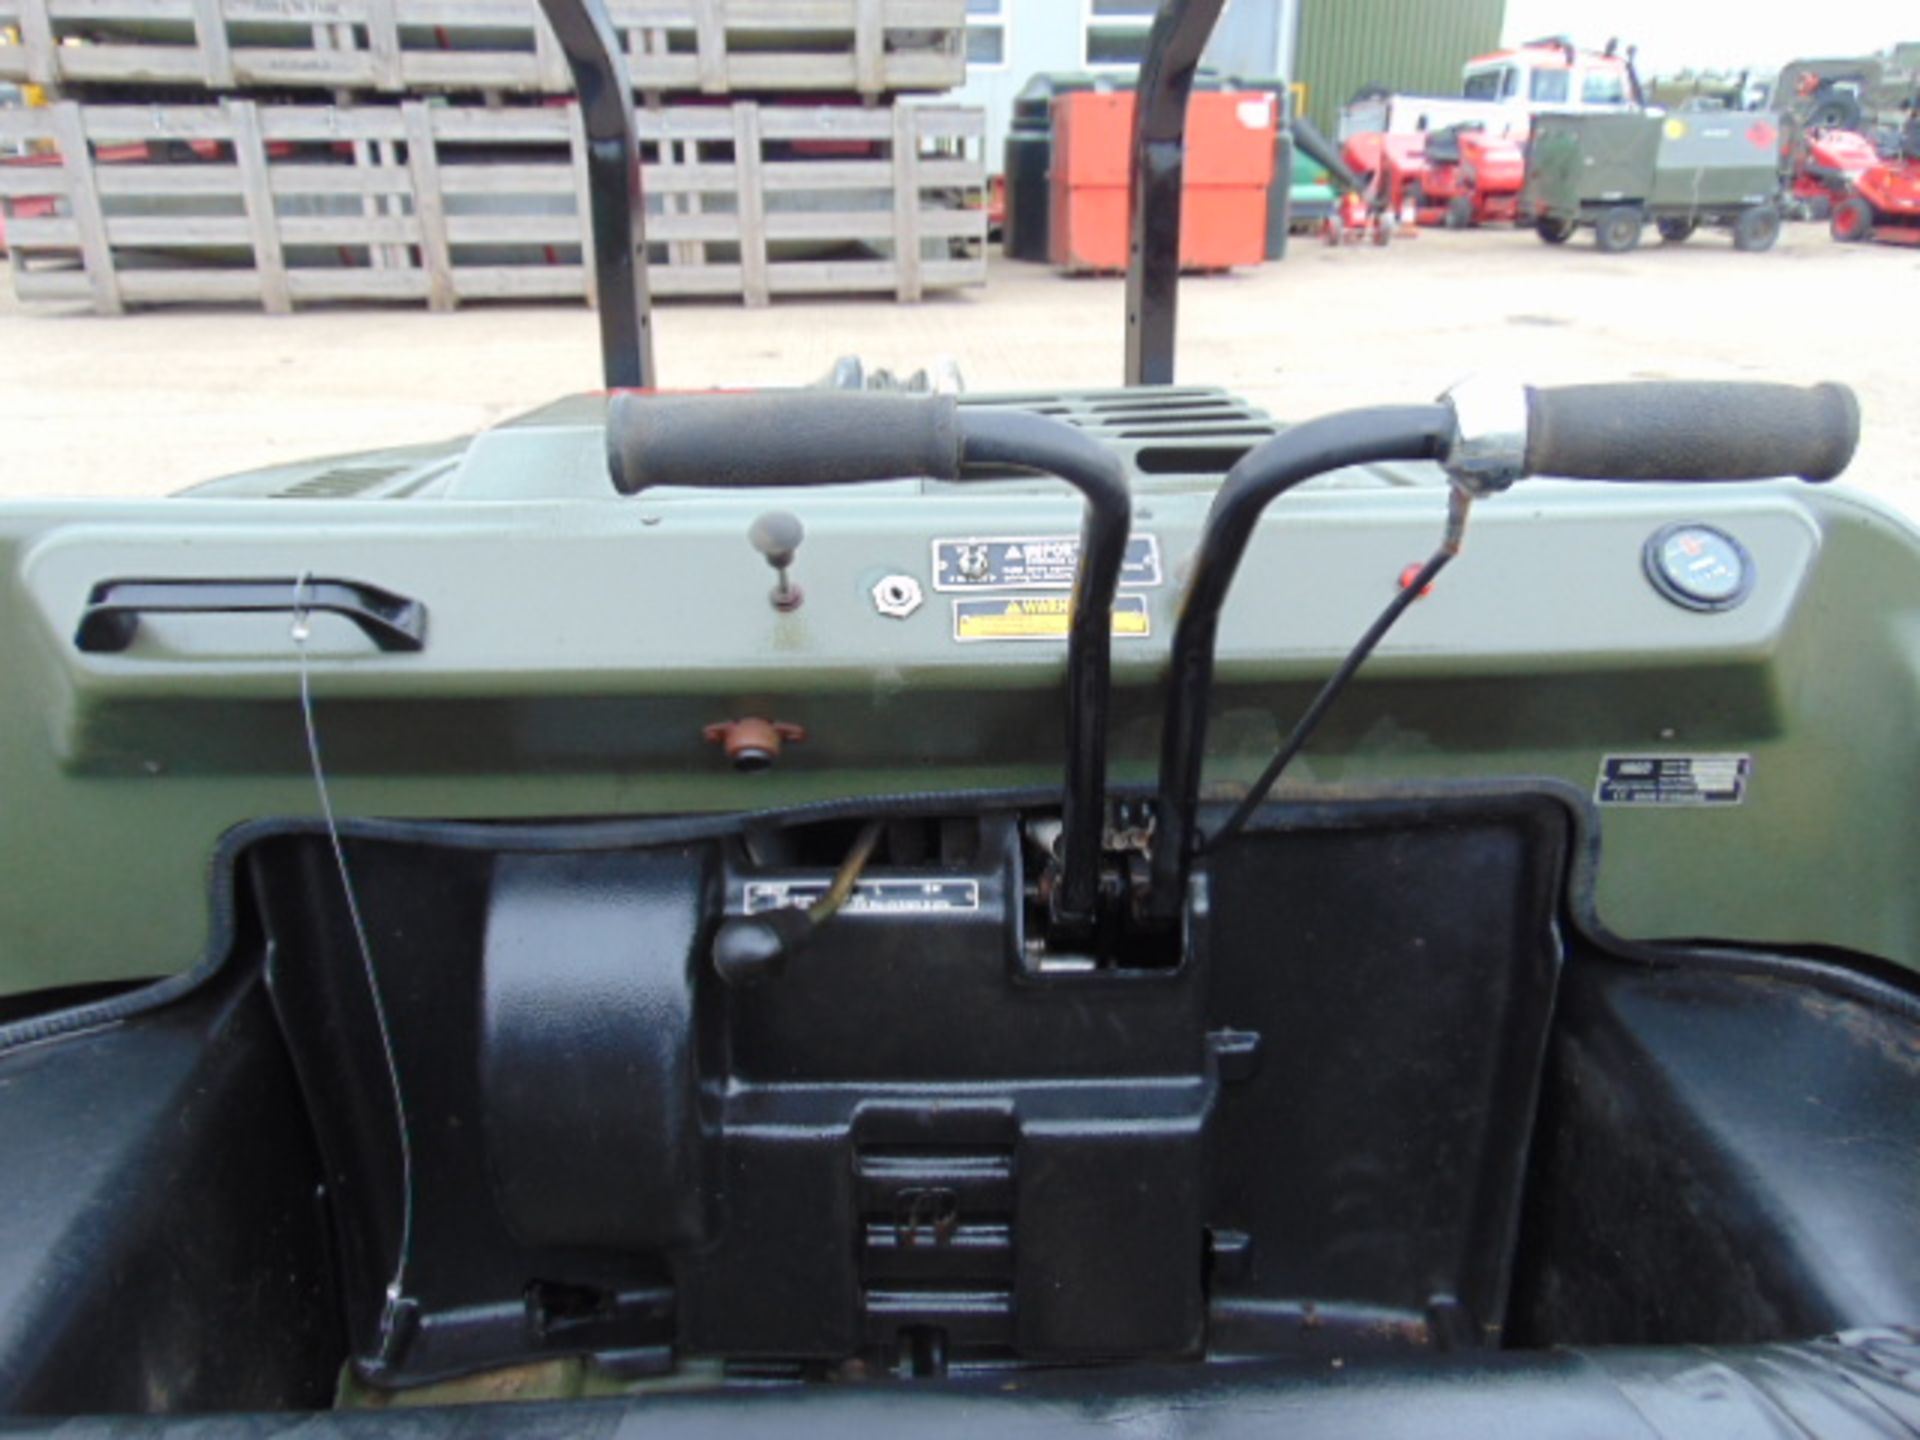 Argocat 8x8 Response Amphibious ATV with Front Mounted Winch - Image 11 of 28